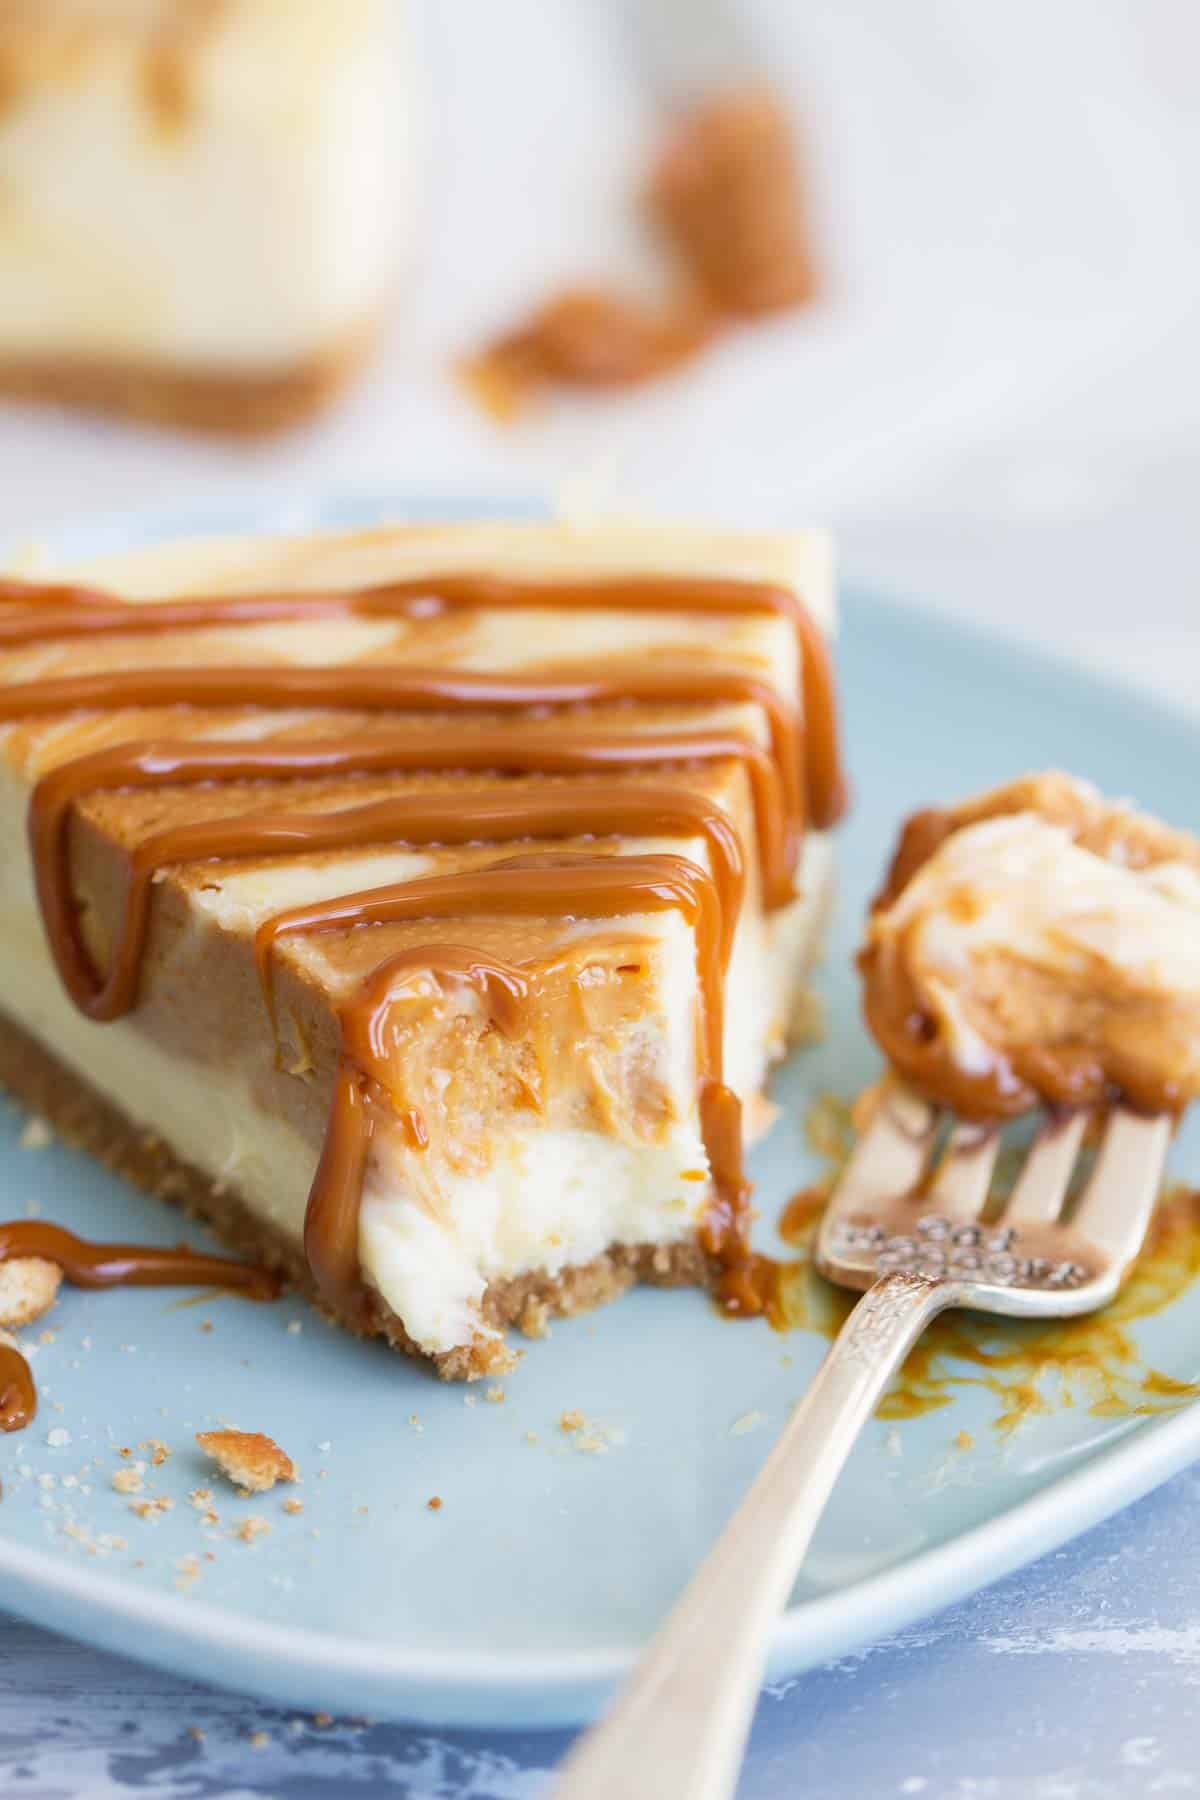 dulce de leche cheesecake with bite taken from it